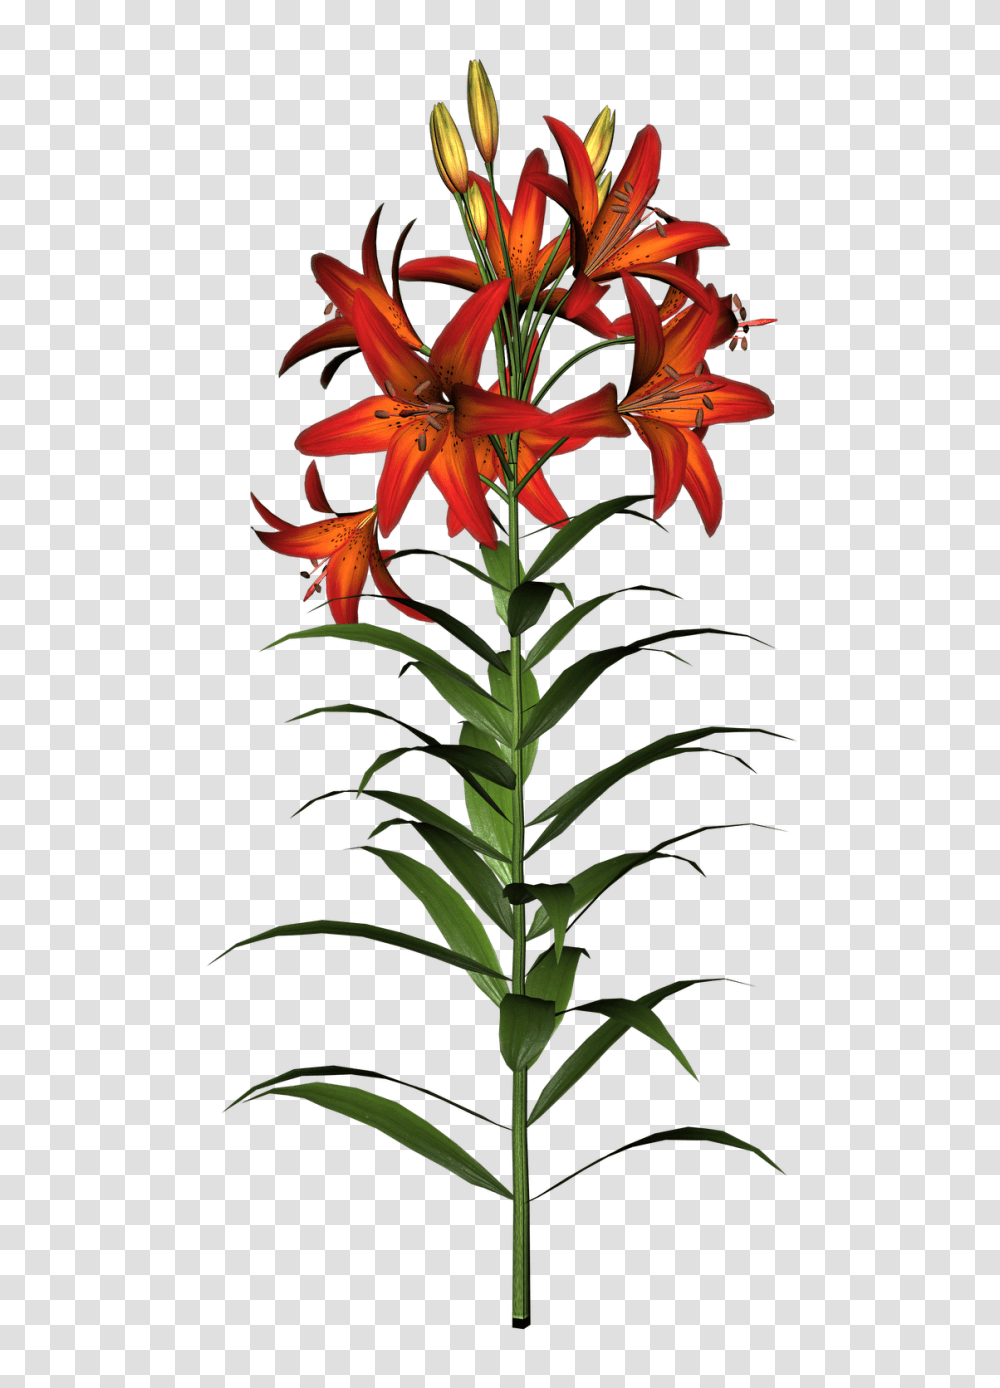 Free High Resolution Clipart Images Free High Resolution Clip, Plant, Flower, Blossom, Lily Transparent Png